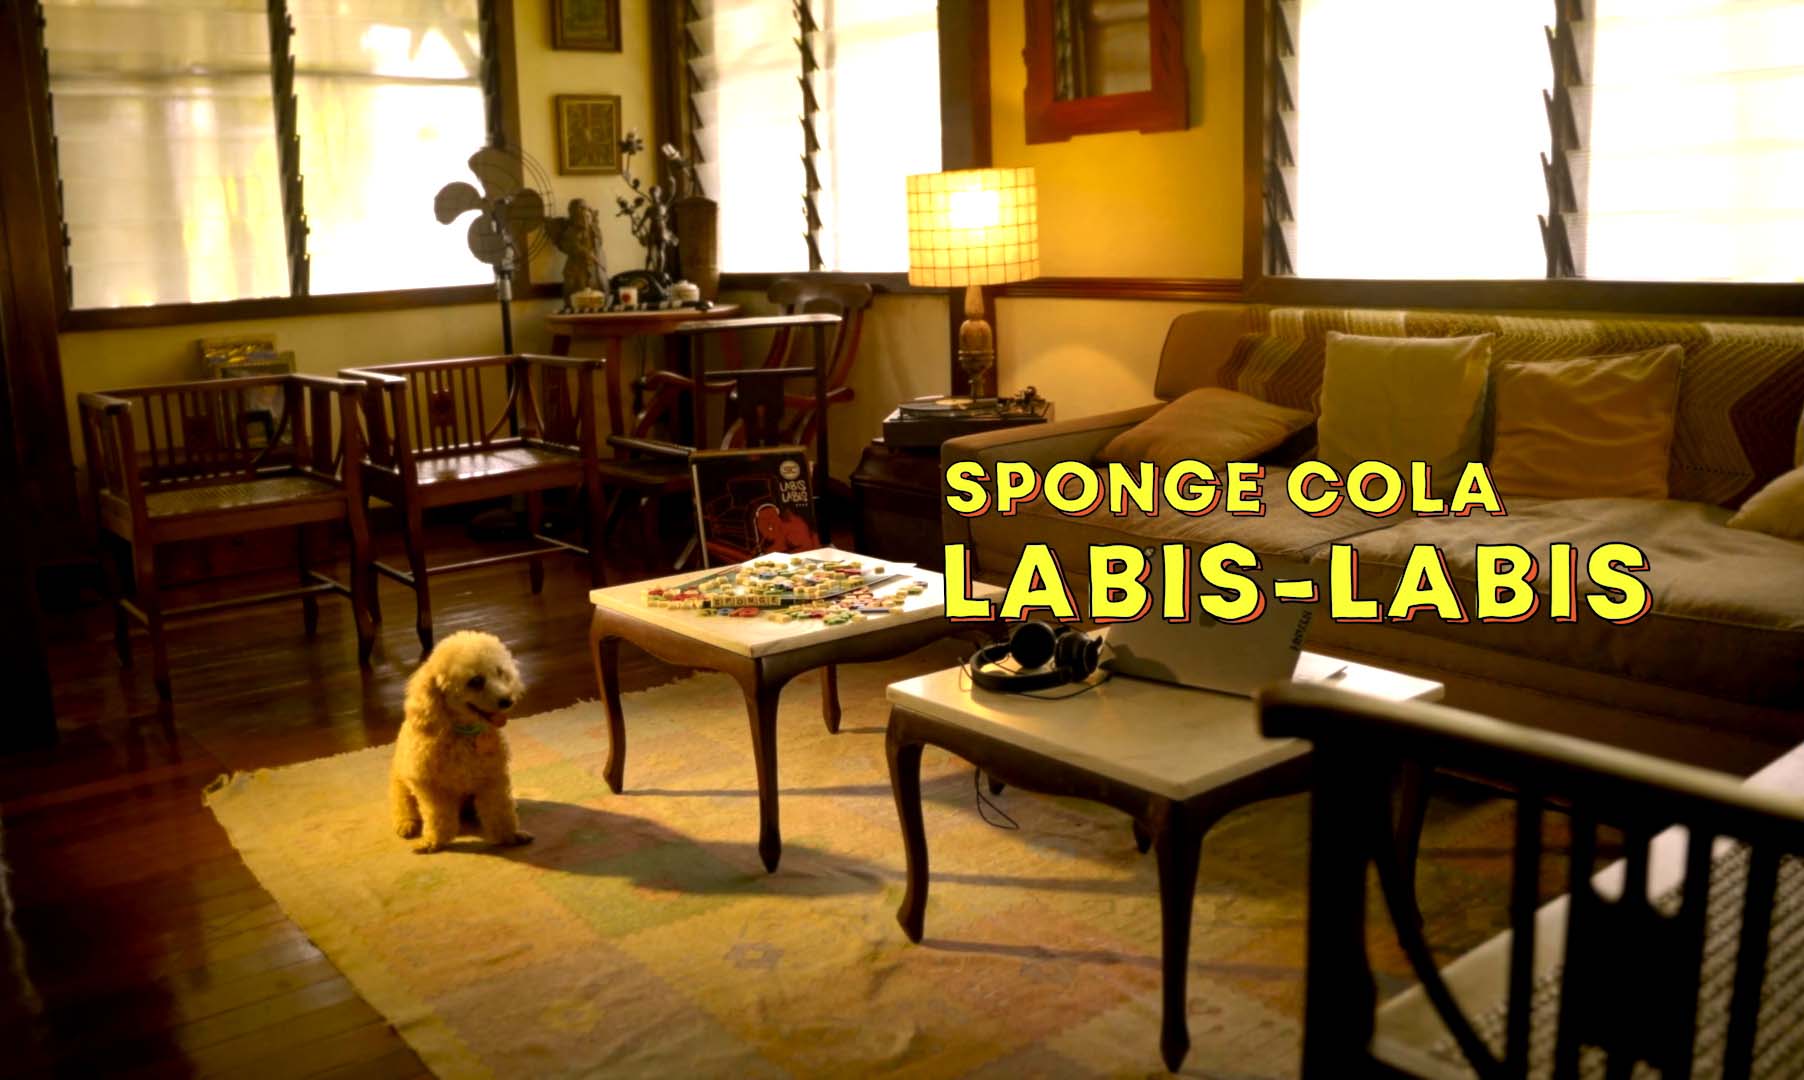 Two puppies star in the rom-com music video of Sponge Cola’s “Labis-labis”